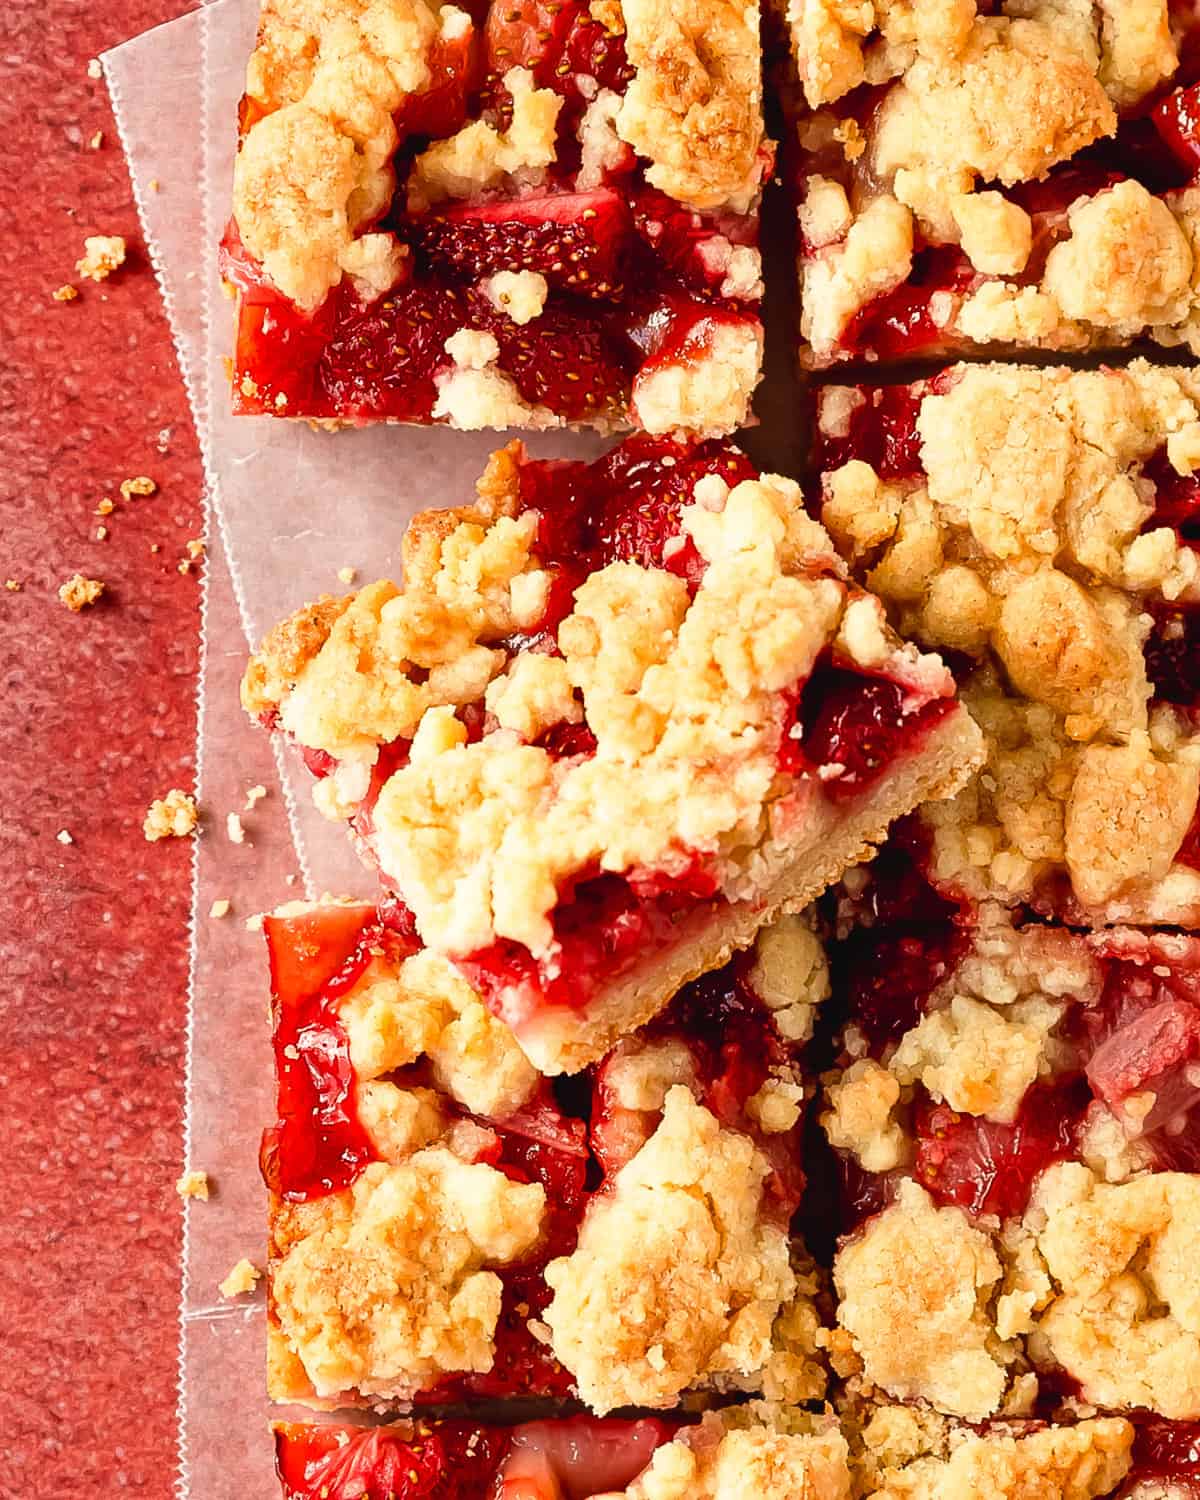 Strawberry bars are wonderfully delicious cookie crumble bars made with a press in shortbread crust, fresh strawberry filling and a buttery crumb topping. These strawberry crumb bars are quick and easy to make using a few simple ingredients. Make this easy strawberry dessert for the the perfect, refreshing treat to enjoy on a hot day.